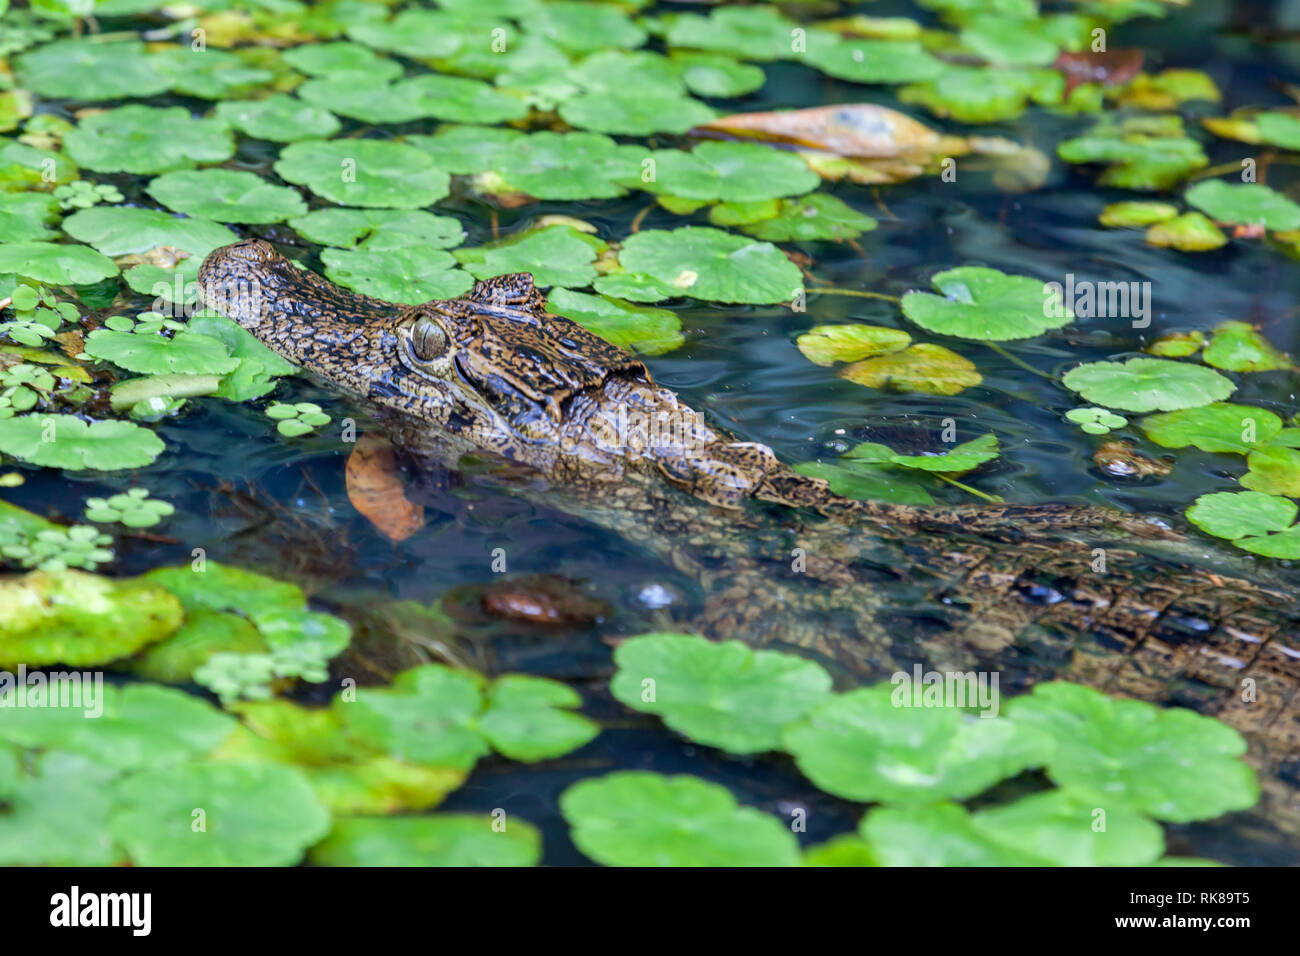 A Caiman in the river with green leaves at Tortuguero National Park in Costa Rica, a smaller kin of the crocodiles. Stock Photo